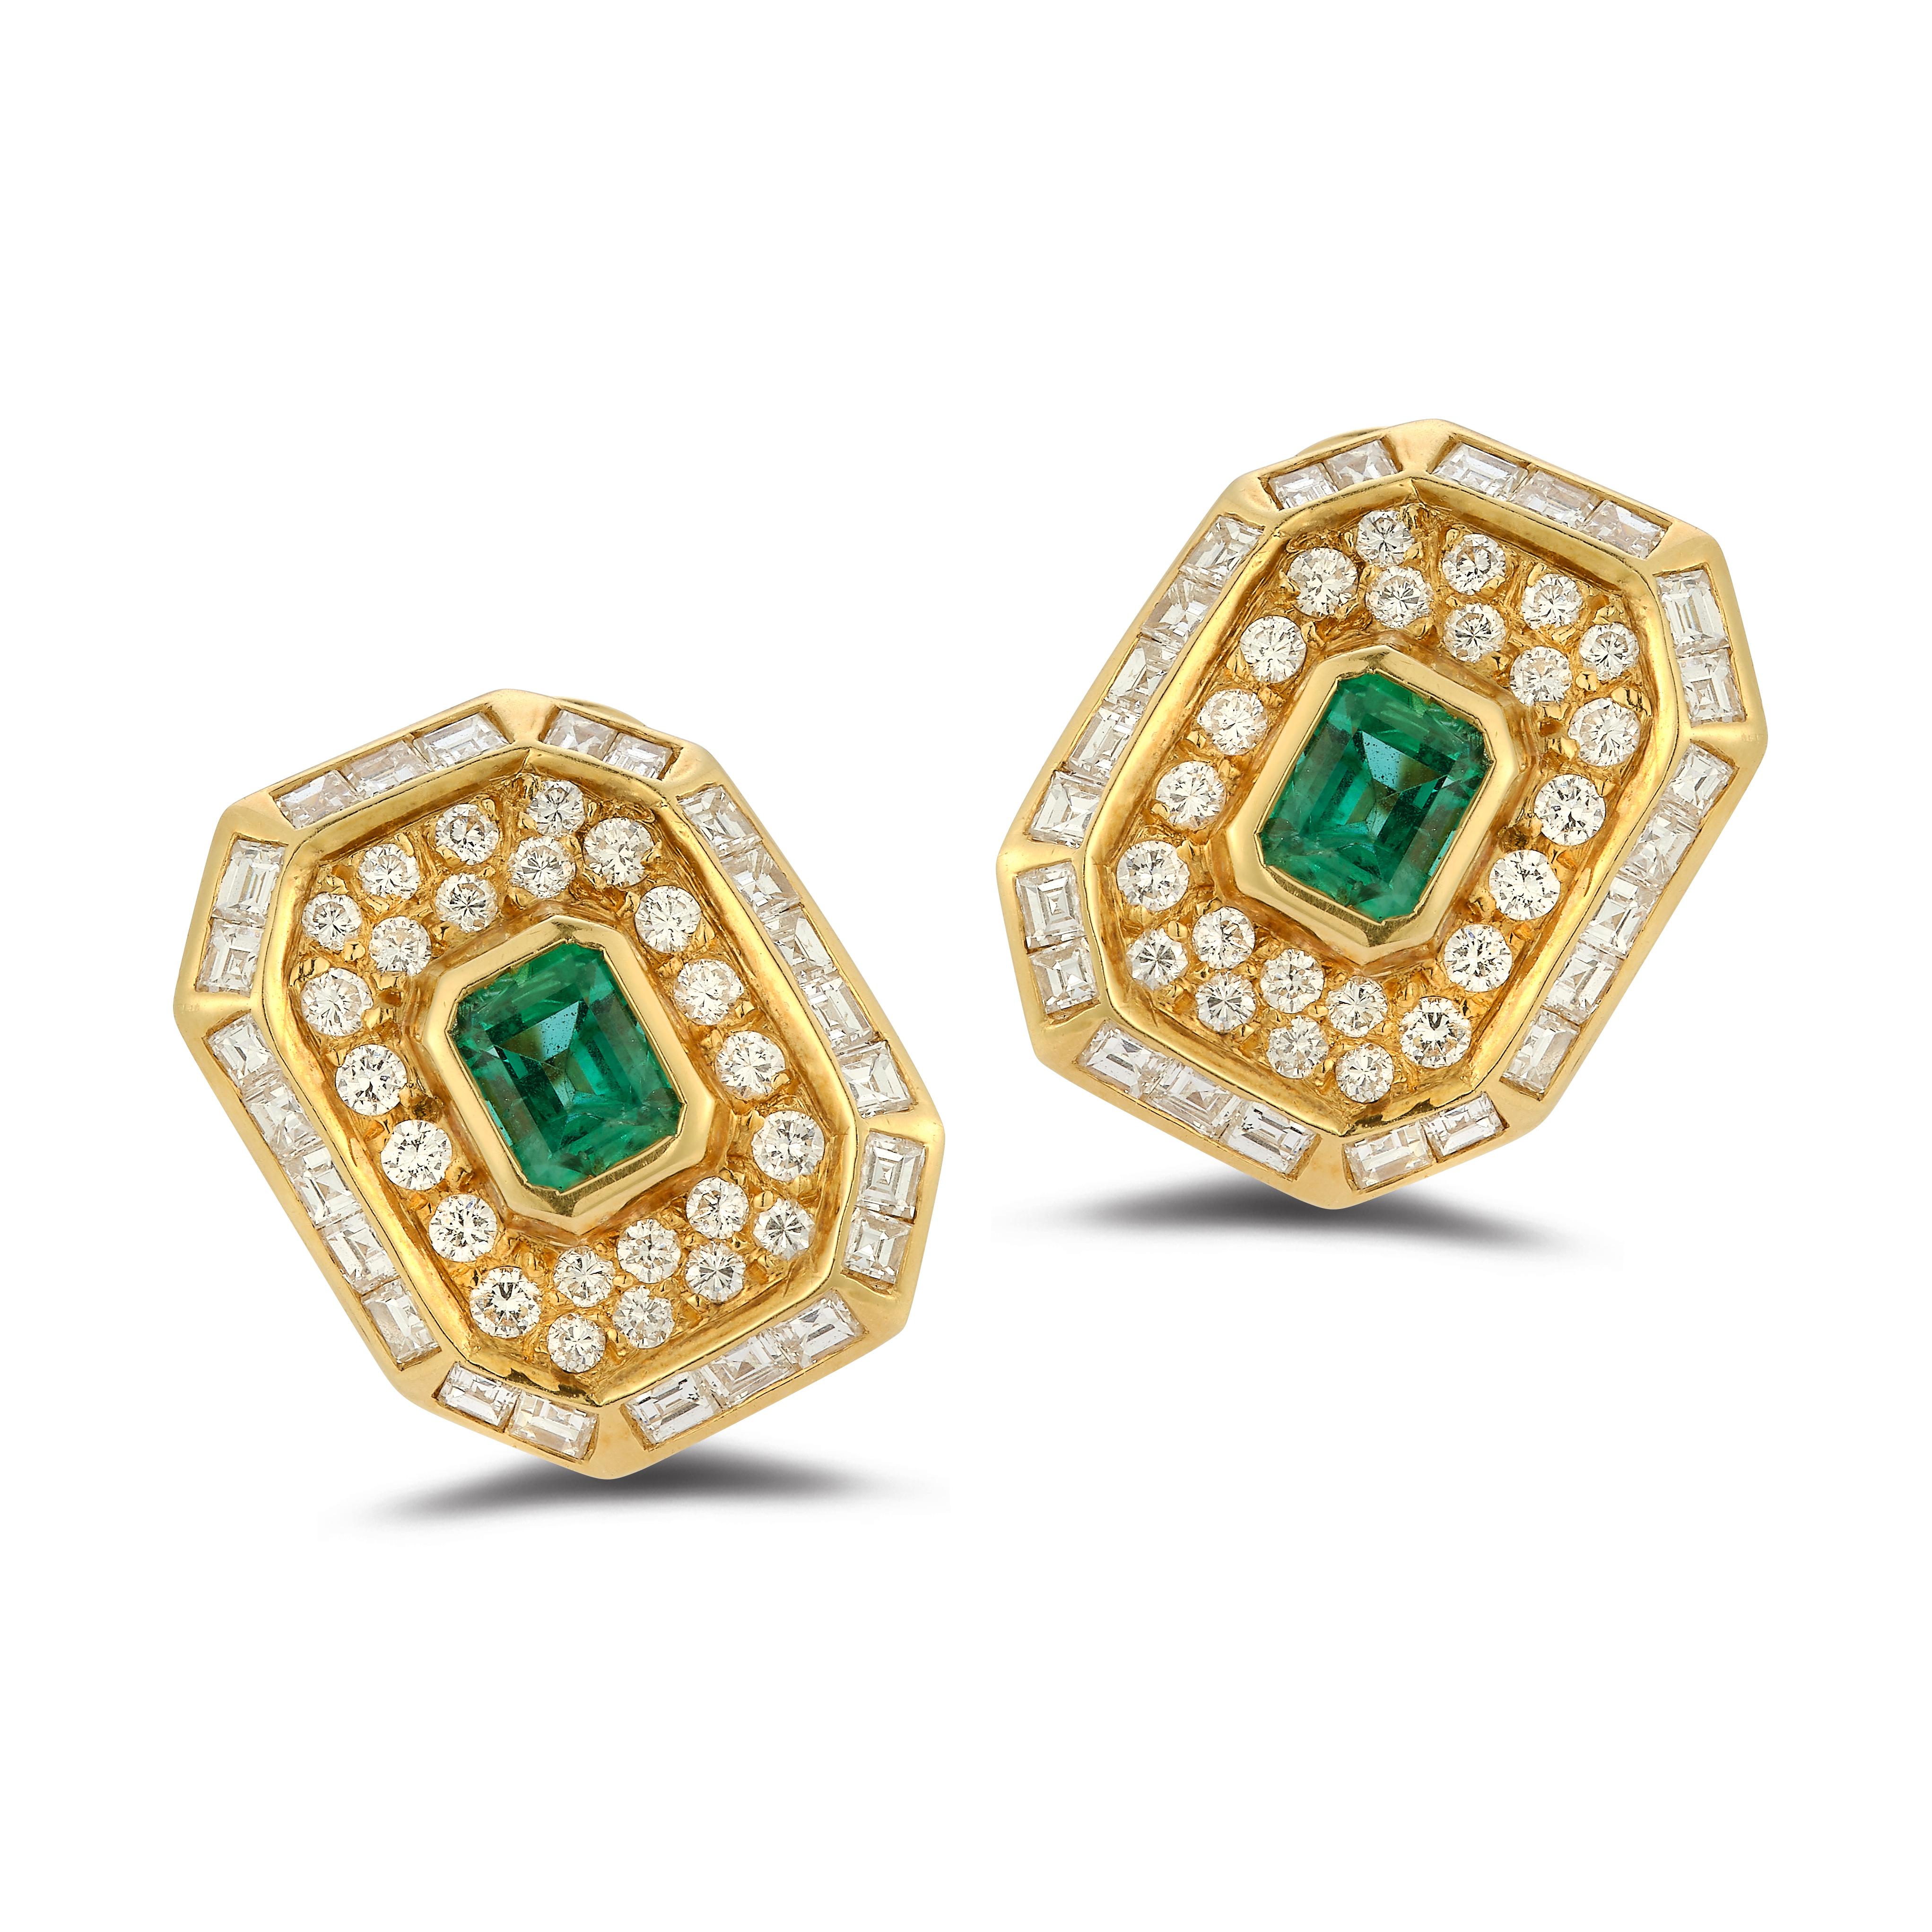 Emerald Cut Emerald & Diamond Earrings

18k gold earrings each set with a central emerald cut emerald surrounded by round and baguette diamonds.

Emerald total approximate weight: 1.40ct

Diamonds total approximate weight: 2.68ct

Measurements: .75